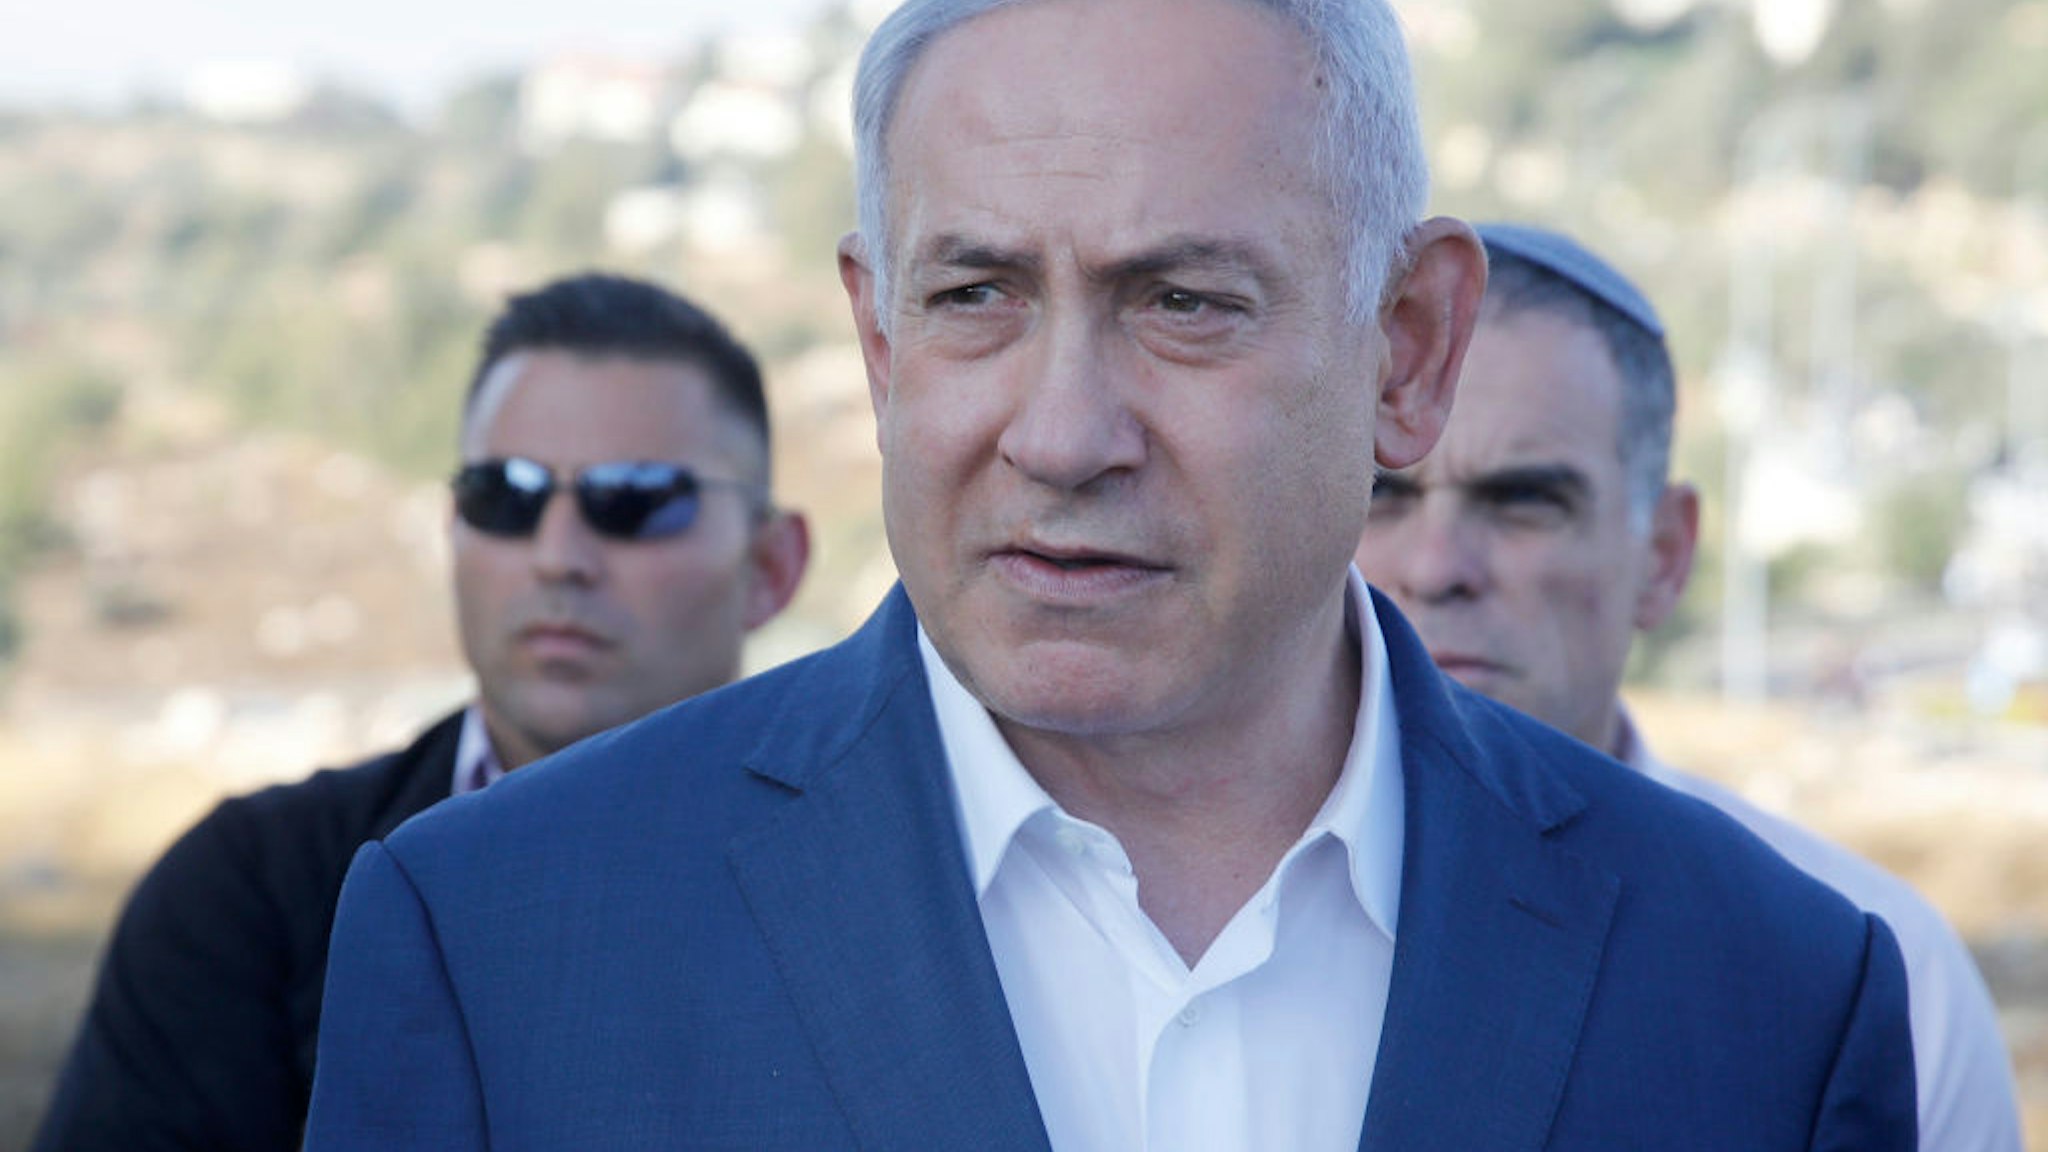 Israel's Prime Minister Benjamin Netanyahu speaks to the press at the site where an off-duty Israeli soldier was found dead